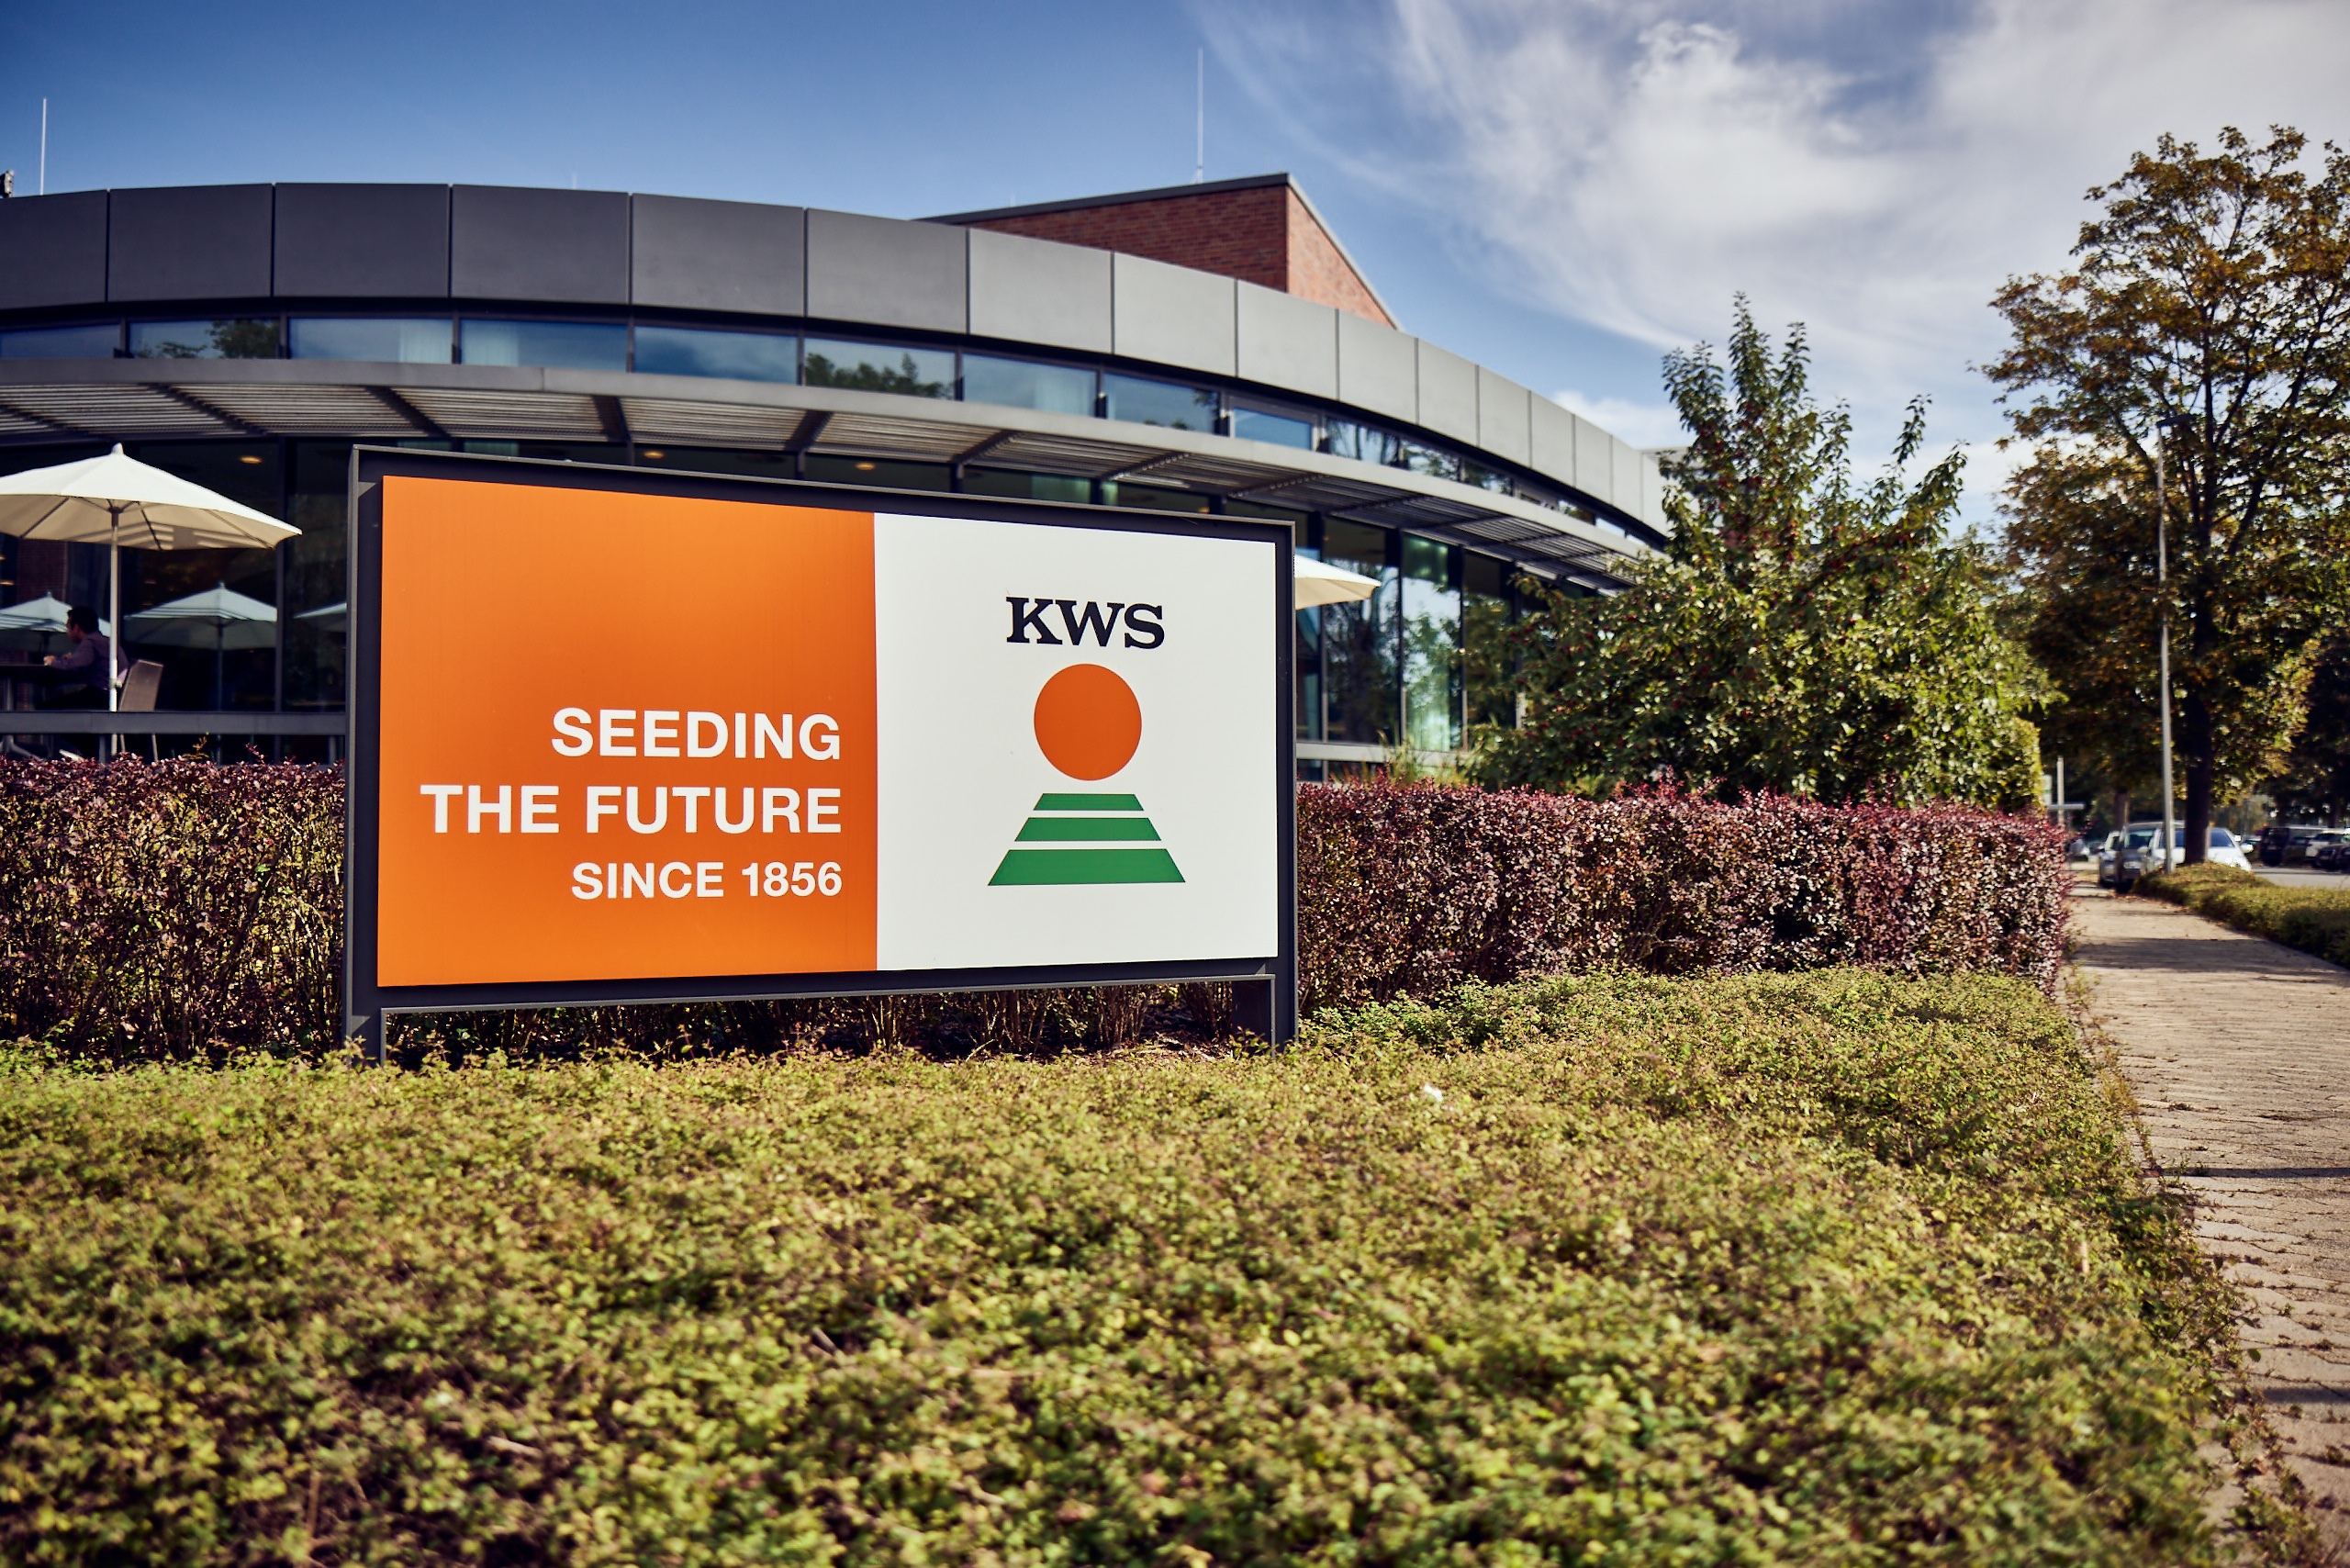 KWS increases forecast for fiscal year 2022/2023